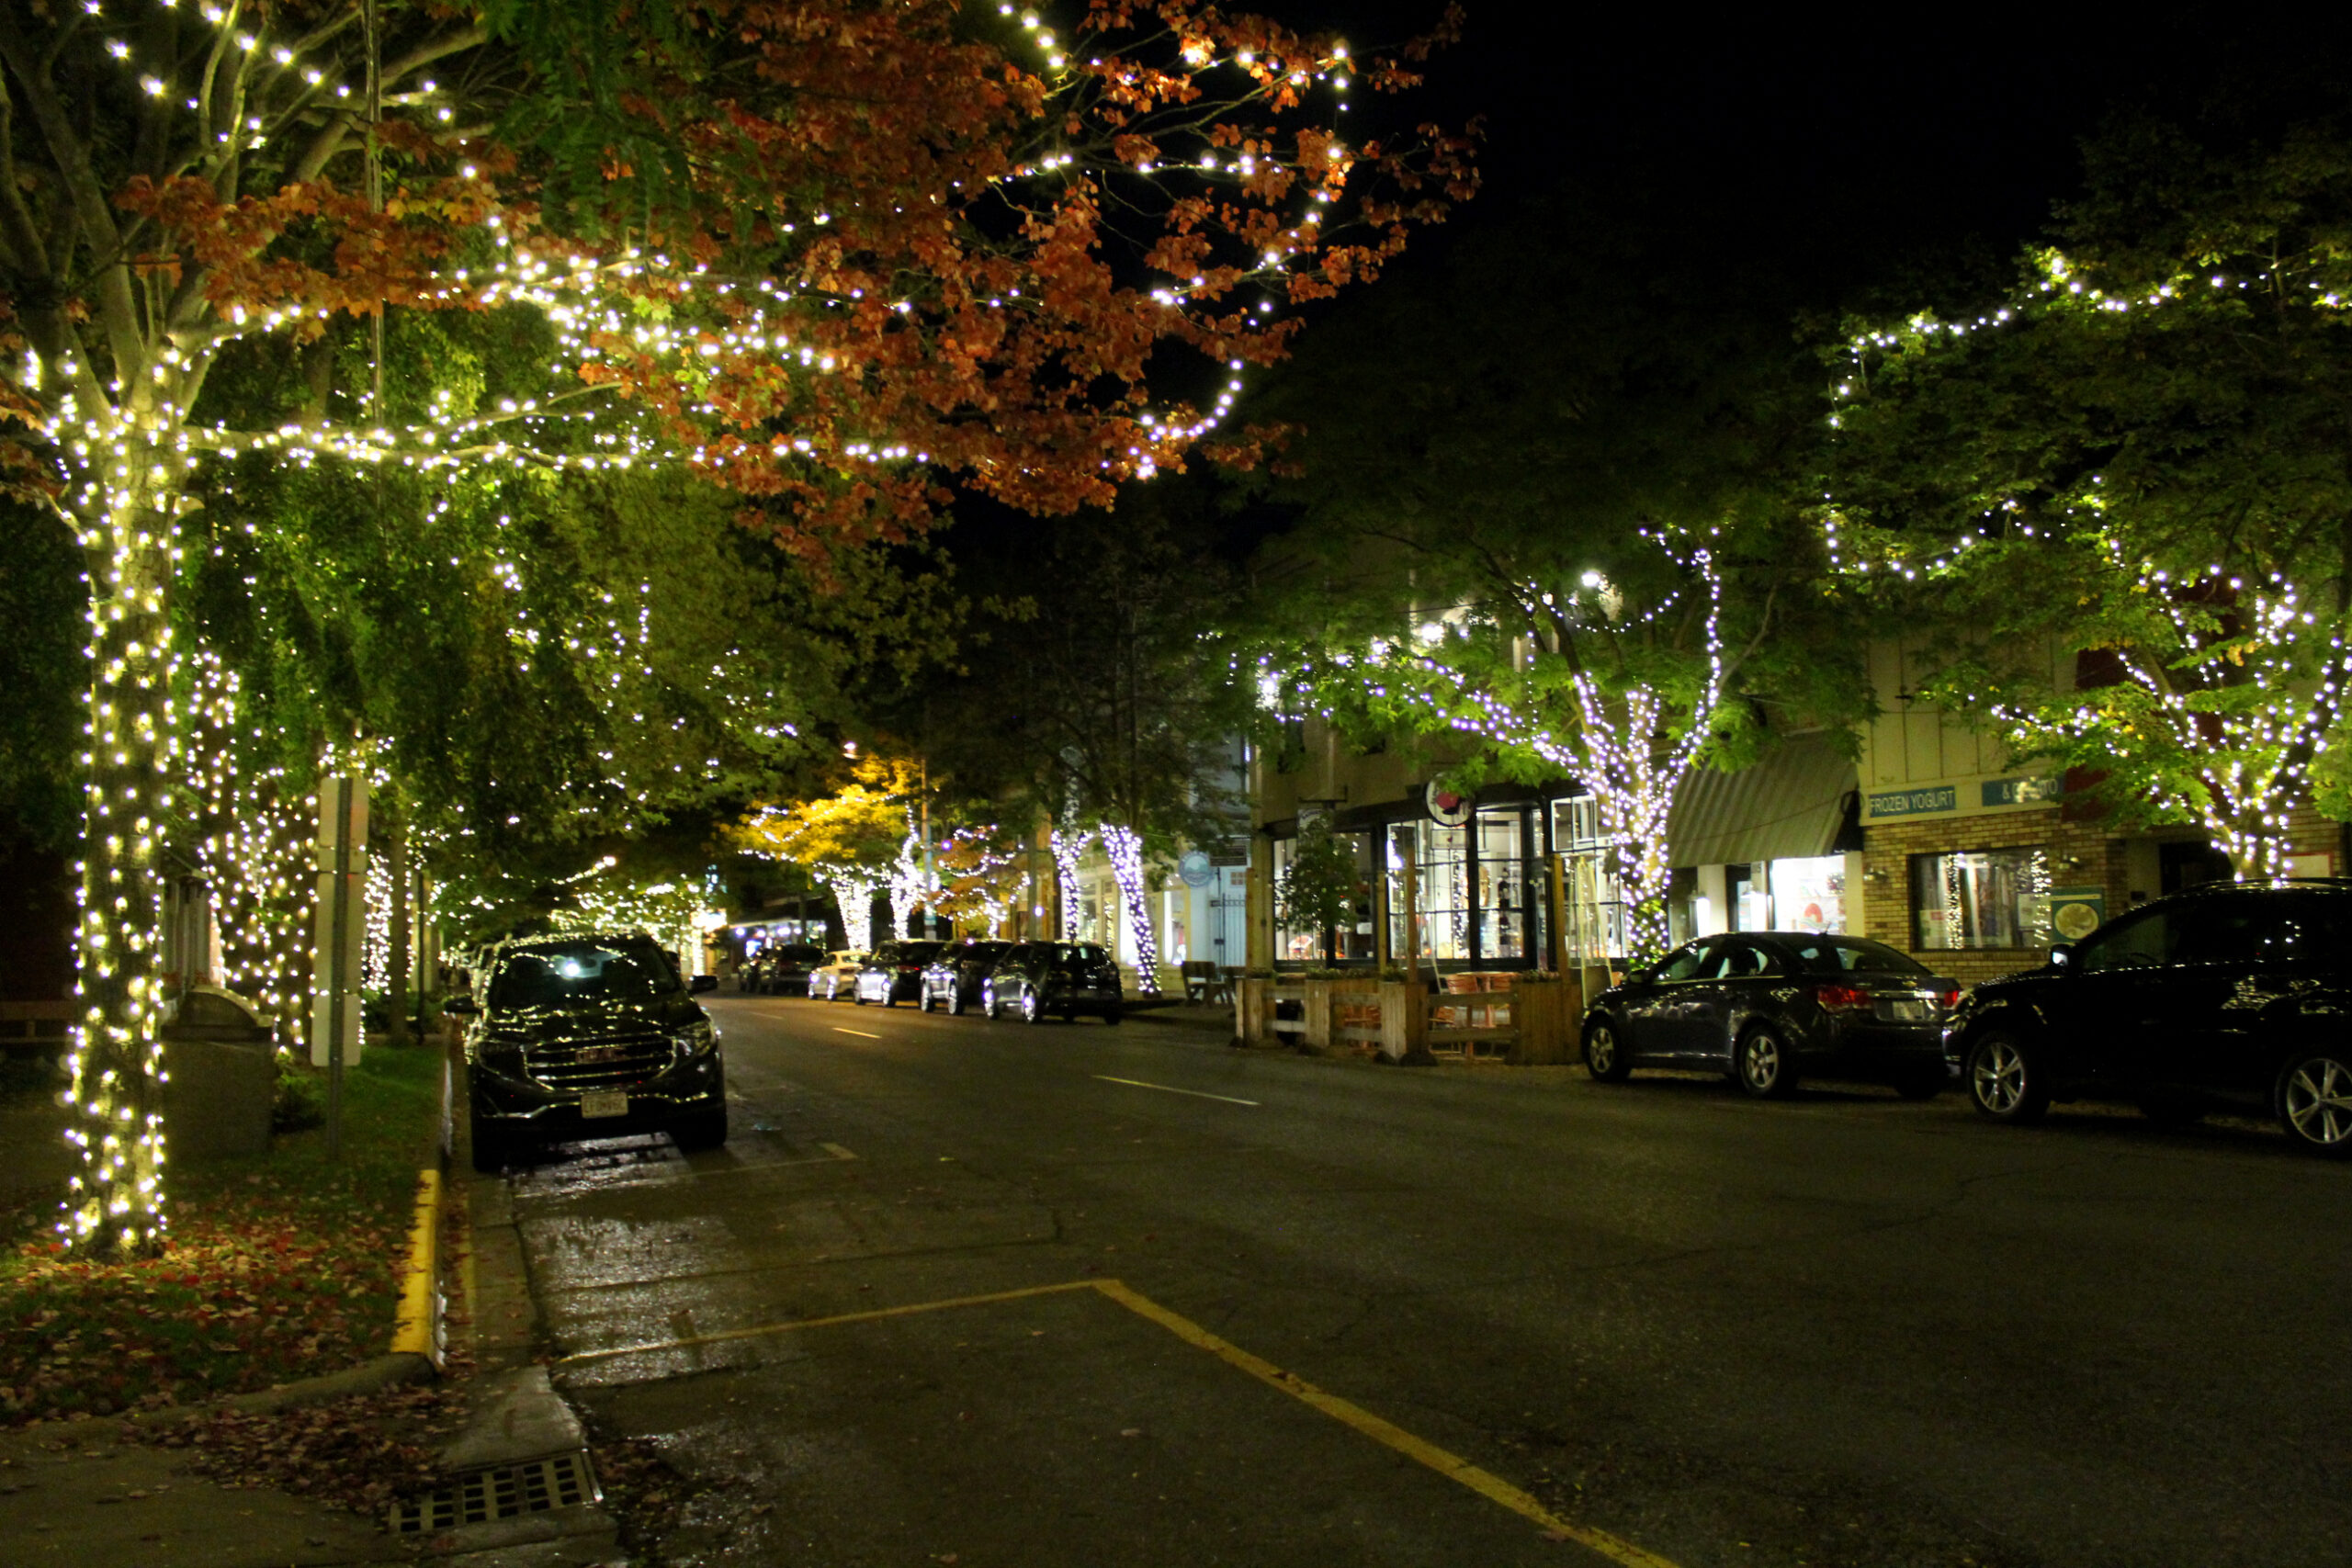 At night, the trees glow from the twinkling white lights wrapped around the trunks [Looking down Butler Street from Culver]